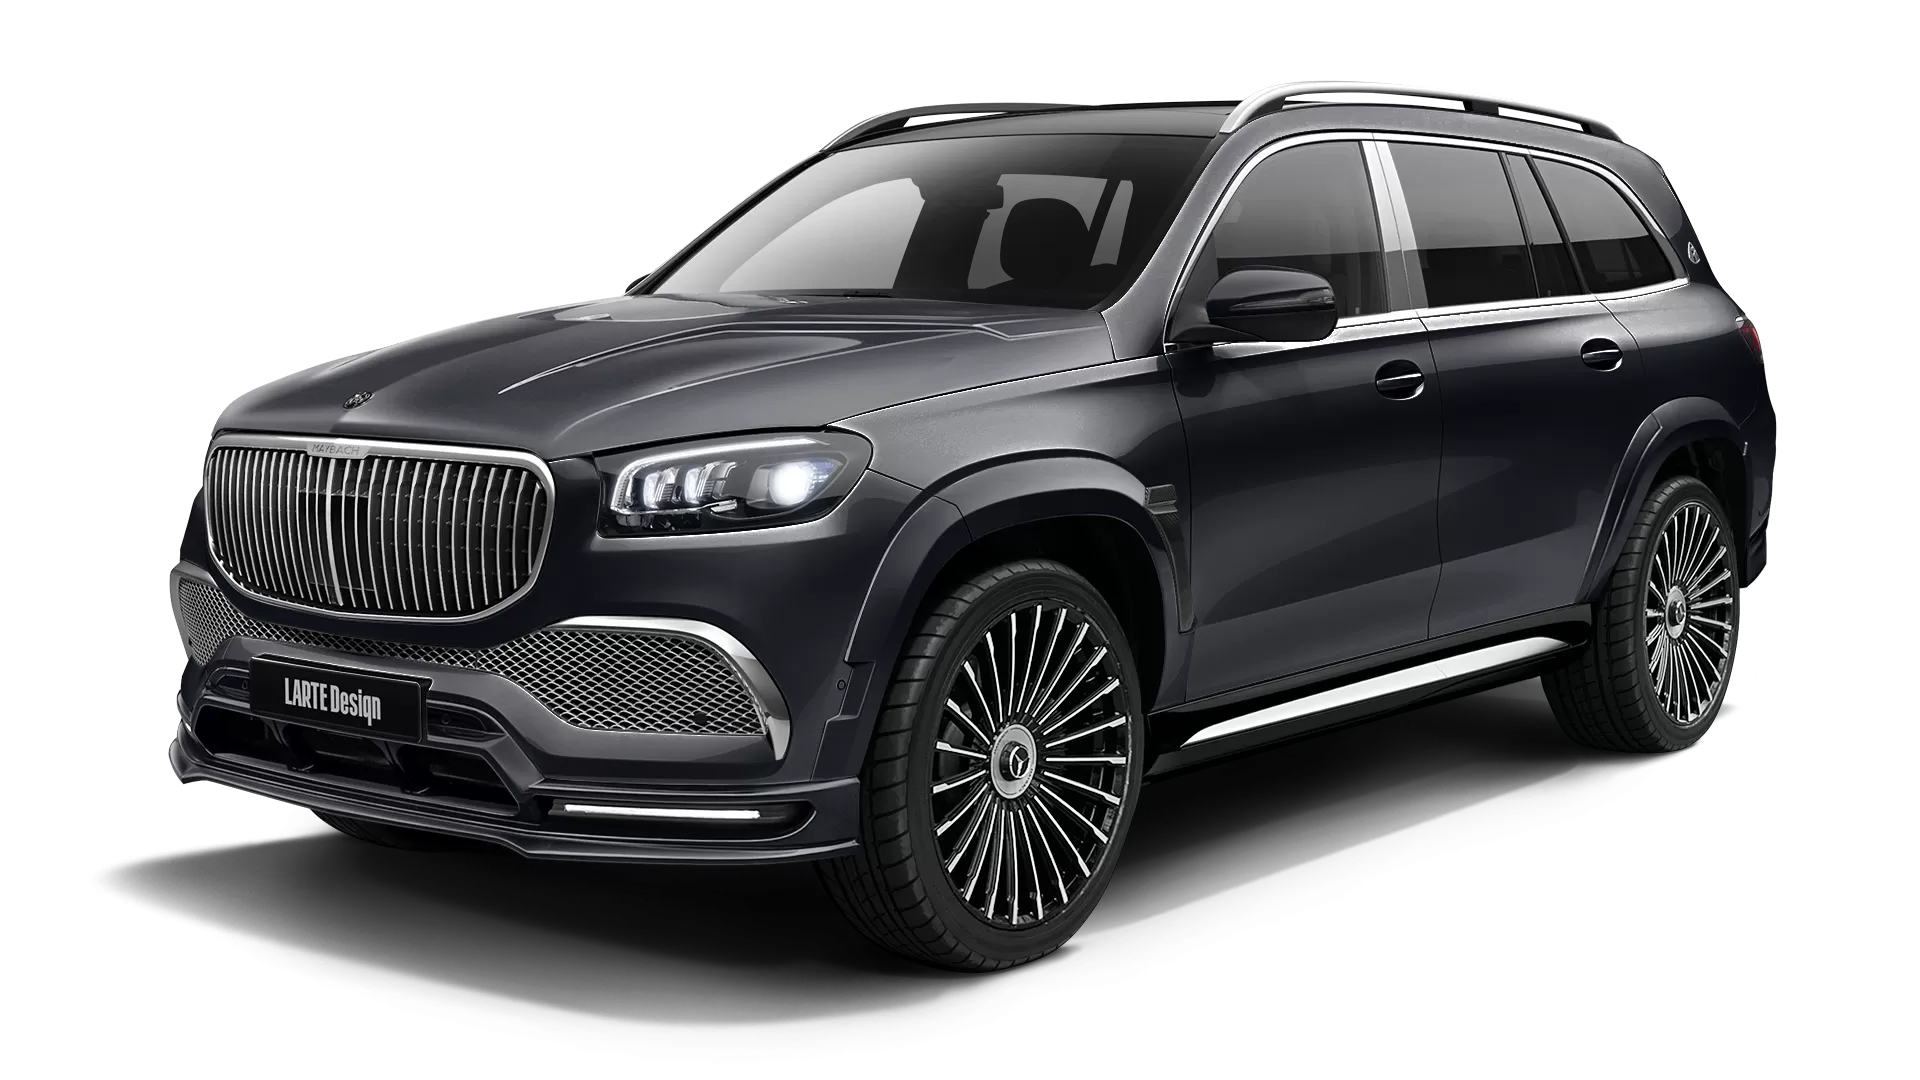 Mercedes Maybach GLS 600 with painted body kit: front view shown in Obsidian Black